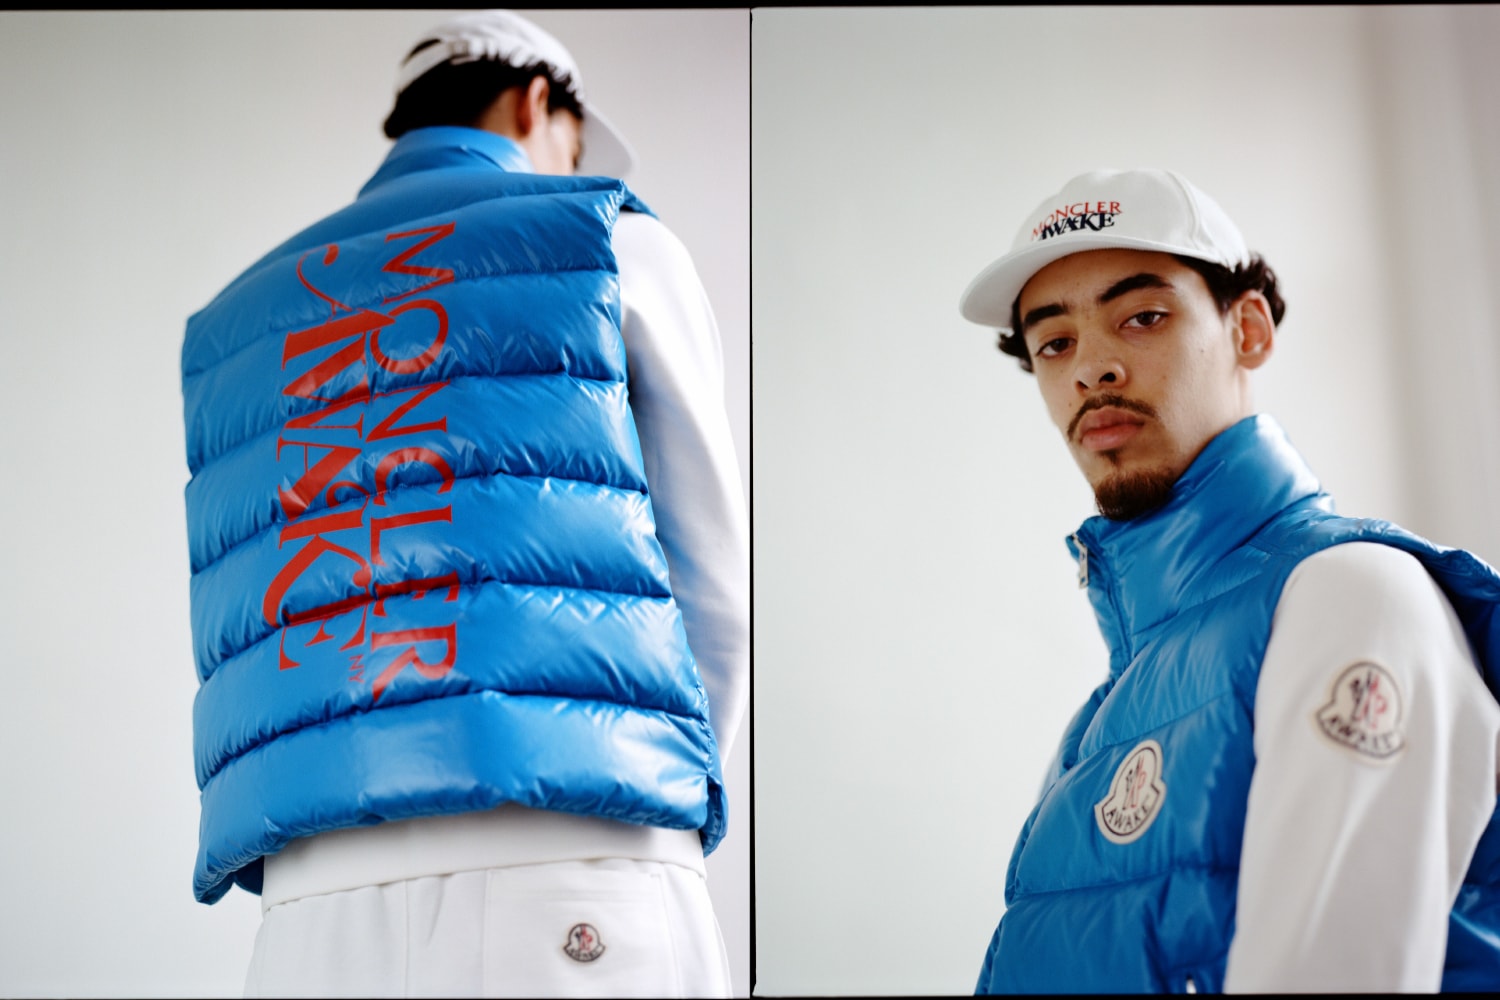 Awake NY x Moncler Capsule Release Info collaboration Parker Gilet goose down puffer vest, hoodie, crewneck, sweatpant, two T-shirts, and a logo lock hat  Alastair McKimm from i-D, Ian Isiah, Jon Gray from Ghetto Gastro, Mario Sorrenti, Maluca Mala, and Richie Shazam. drop date info price 